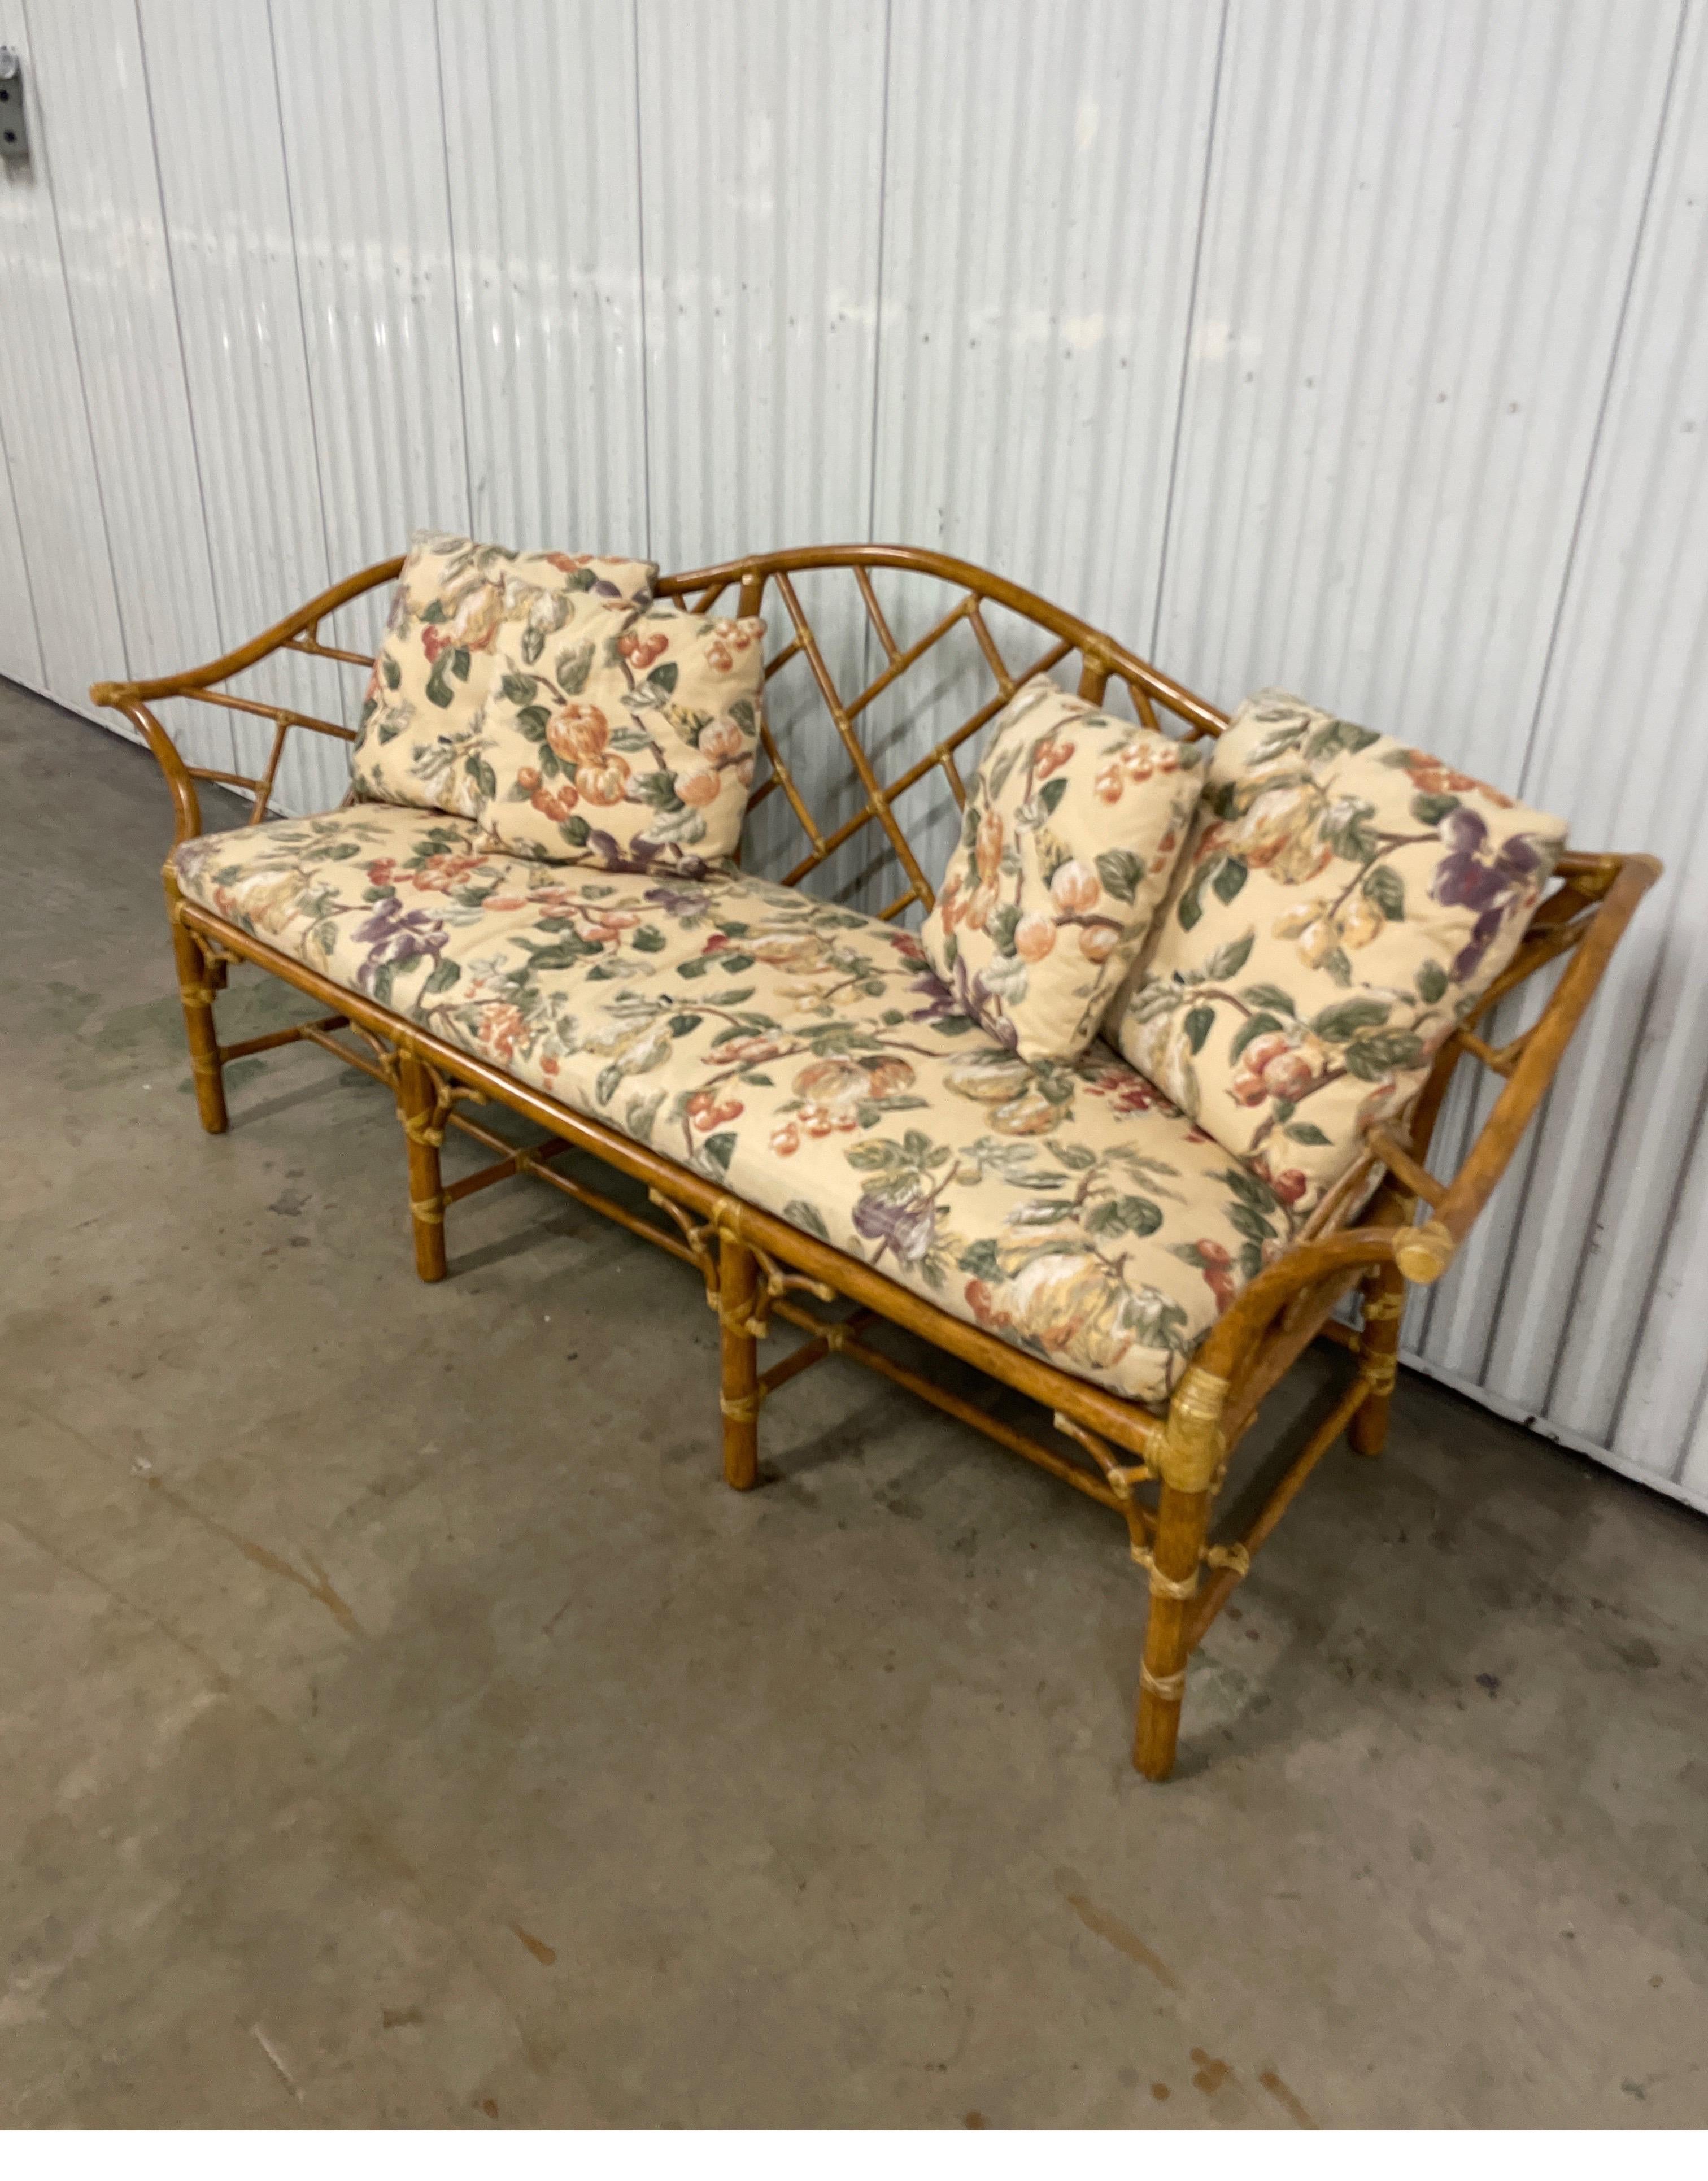 Vintage Mc Guire bamboo & rattan Chinoiserie style sofa in natural color. Very well detailed sofa with stretchers and rolled arms. The 84.5